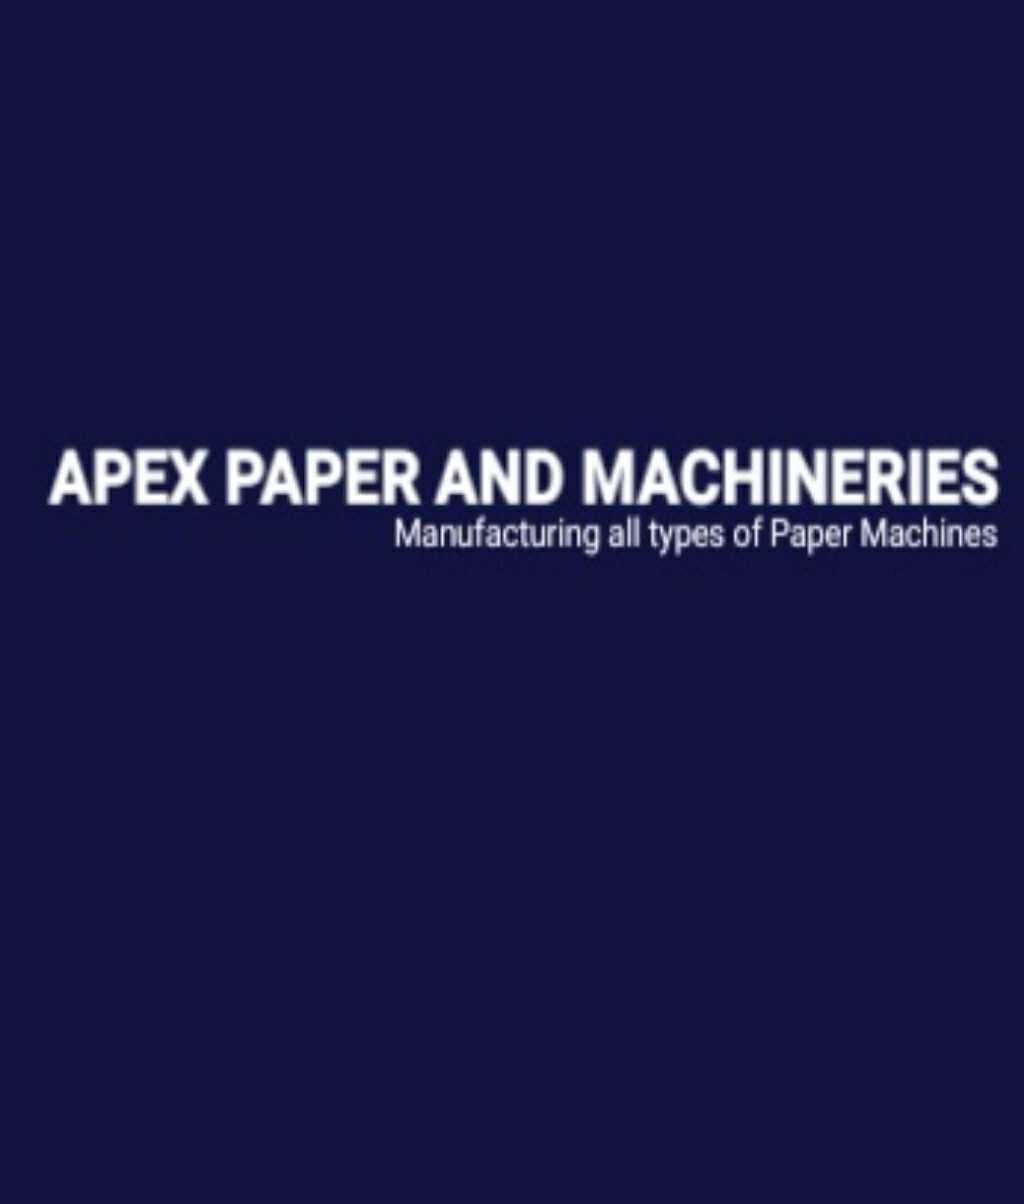 Apex Paper And Machineries